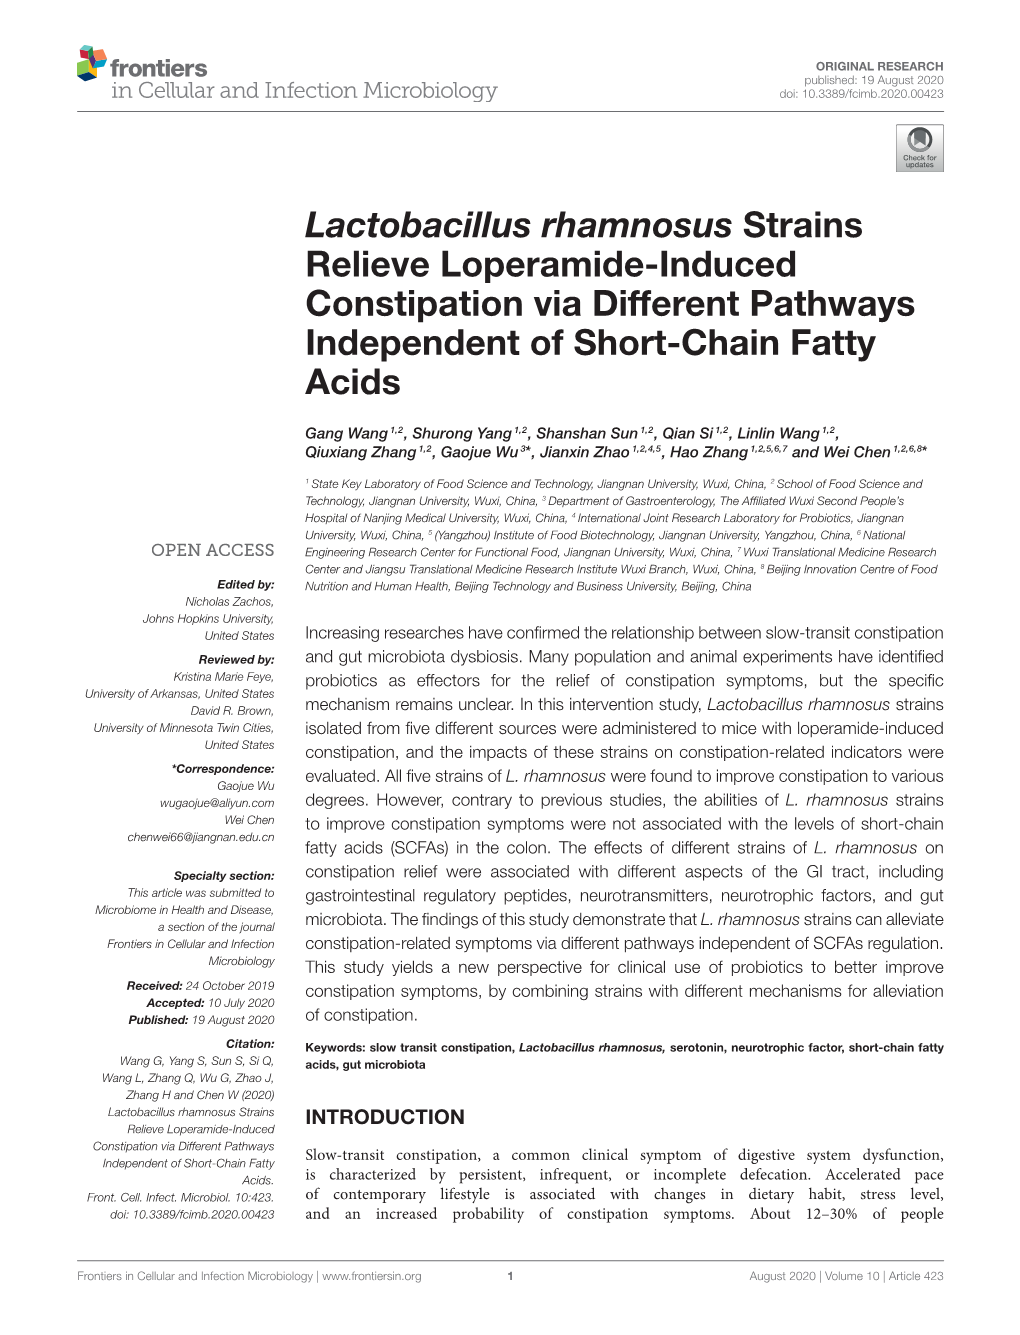 Lactobacillus Rhamnosus Strains Relieve Loperamide-Induced Constipation Via Different Pathways Independent of Short-Chain Fatty Acids